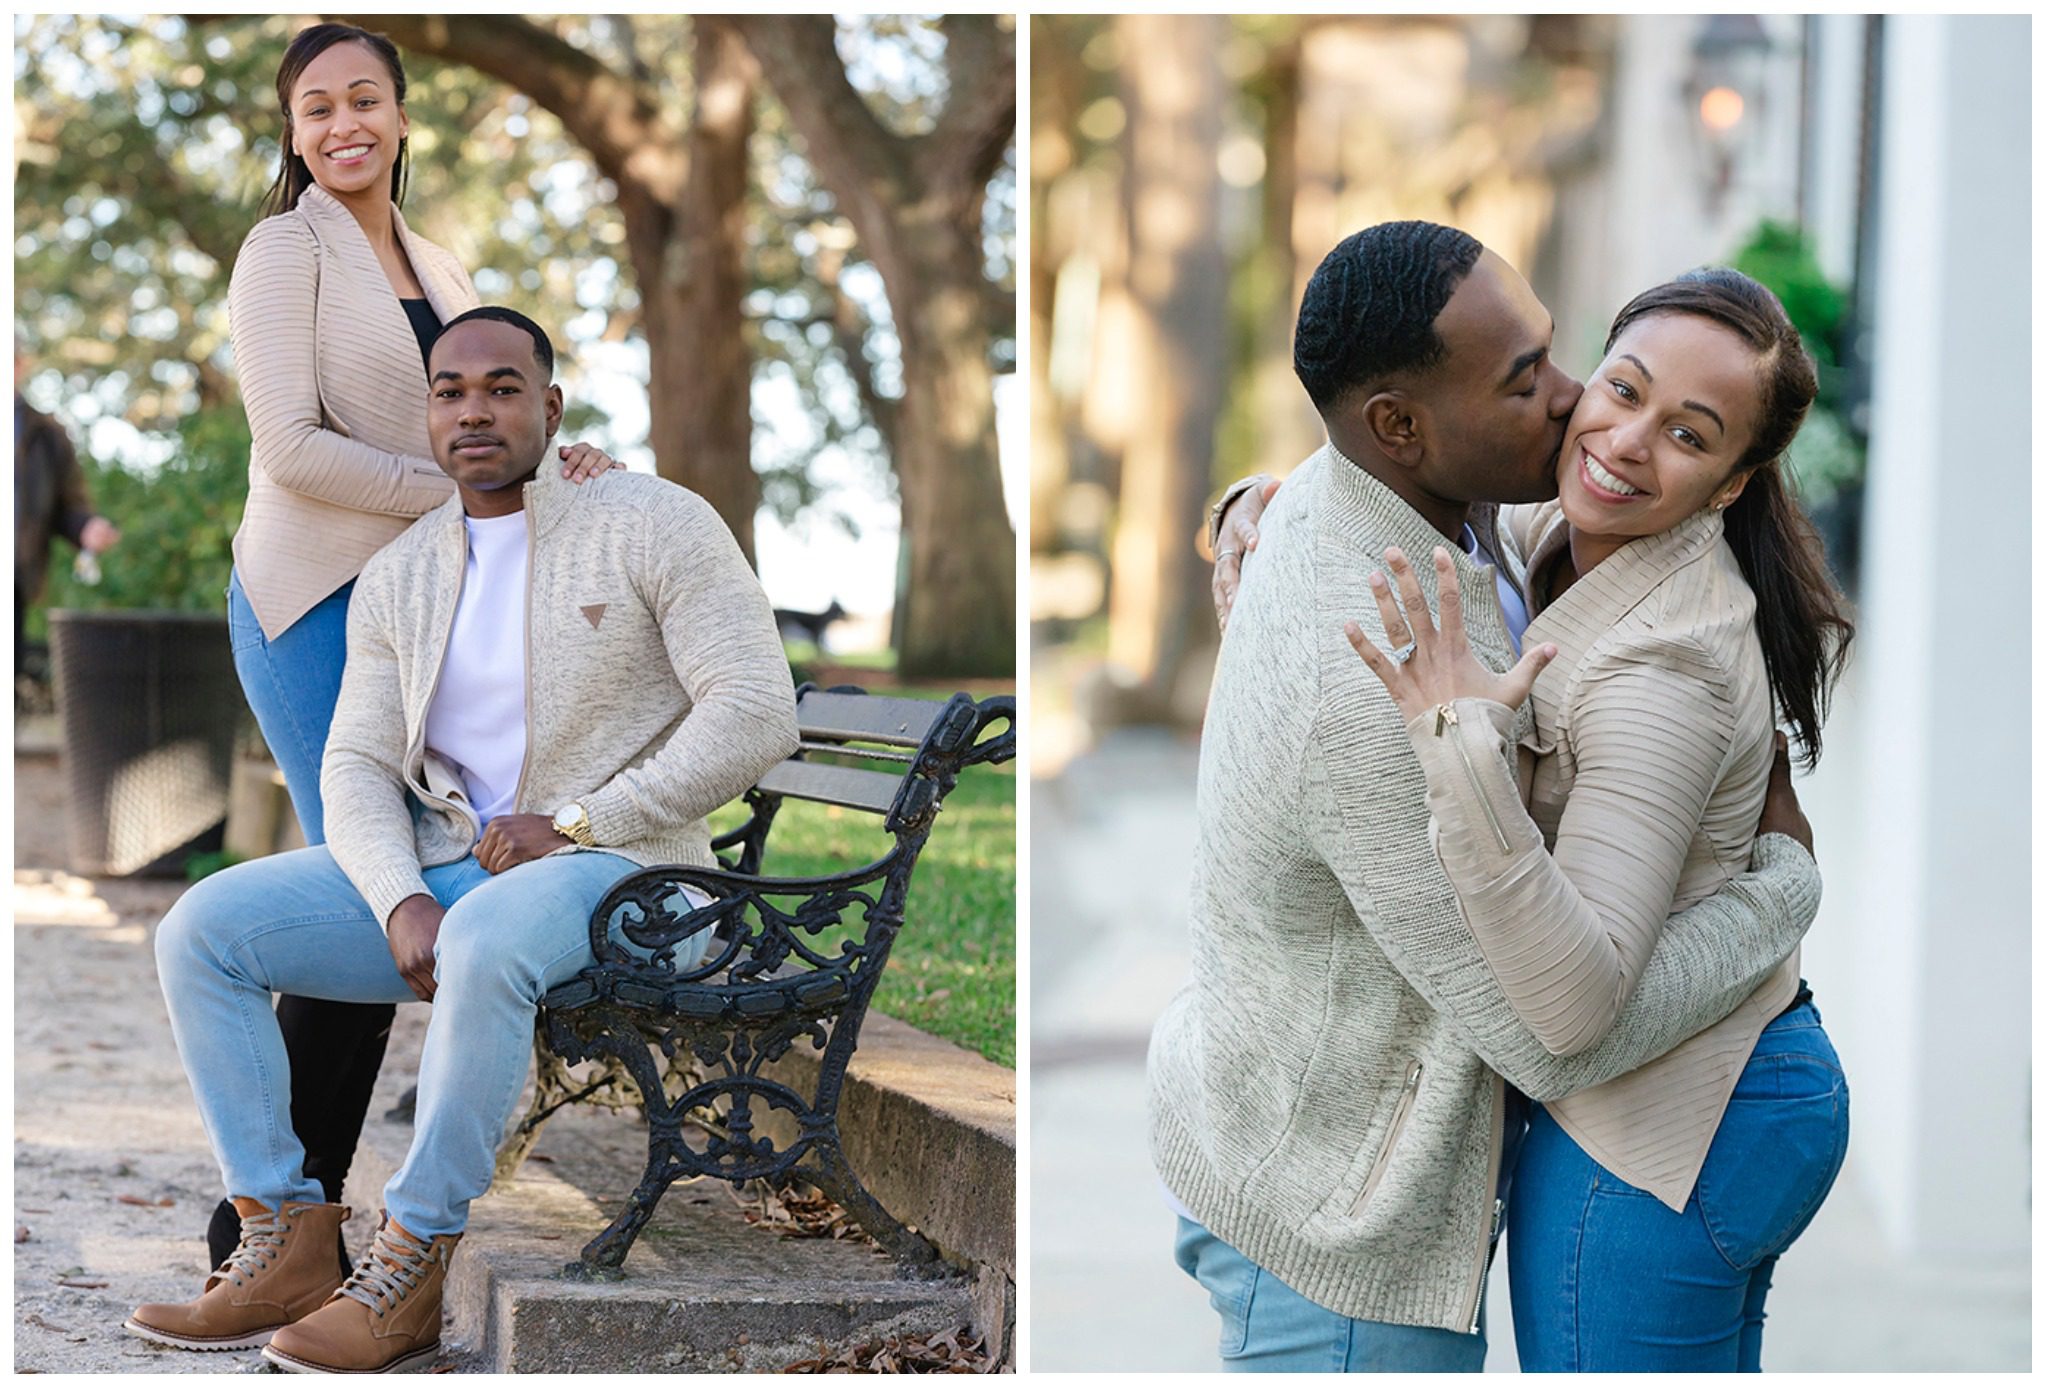 A Casual Engagement Shoot in a Botanical Garden | Engagement pictures poses,  Wedding photography poses, Engagement photo poses